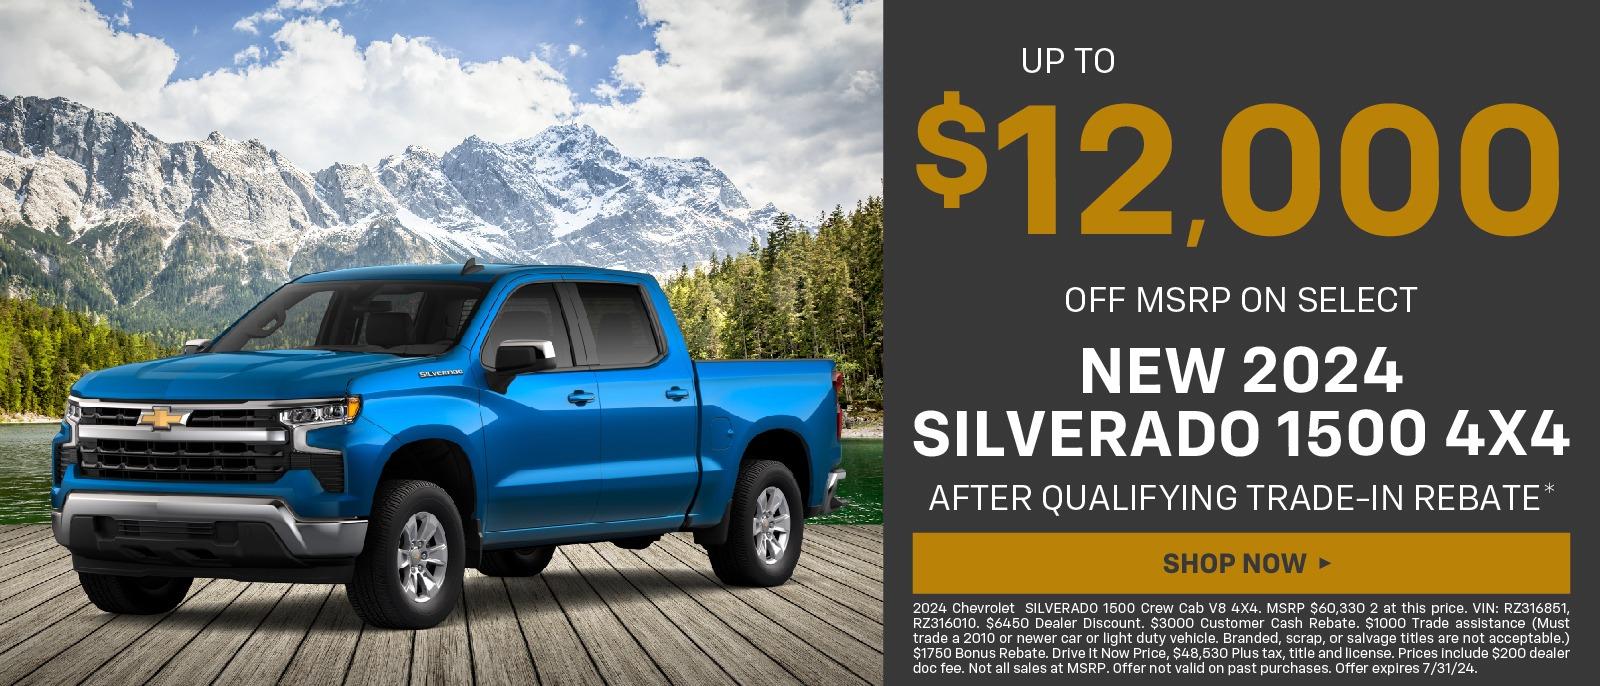 $12,000 off after qualifying trade-in rebate